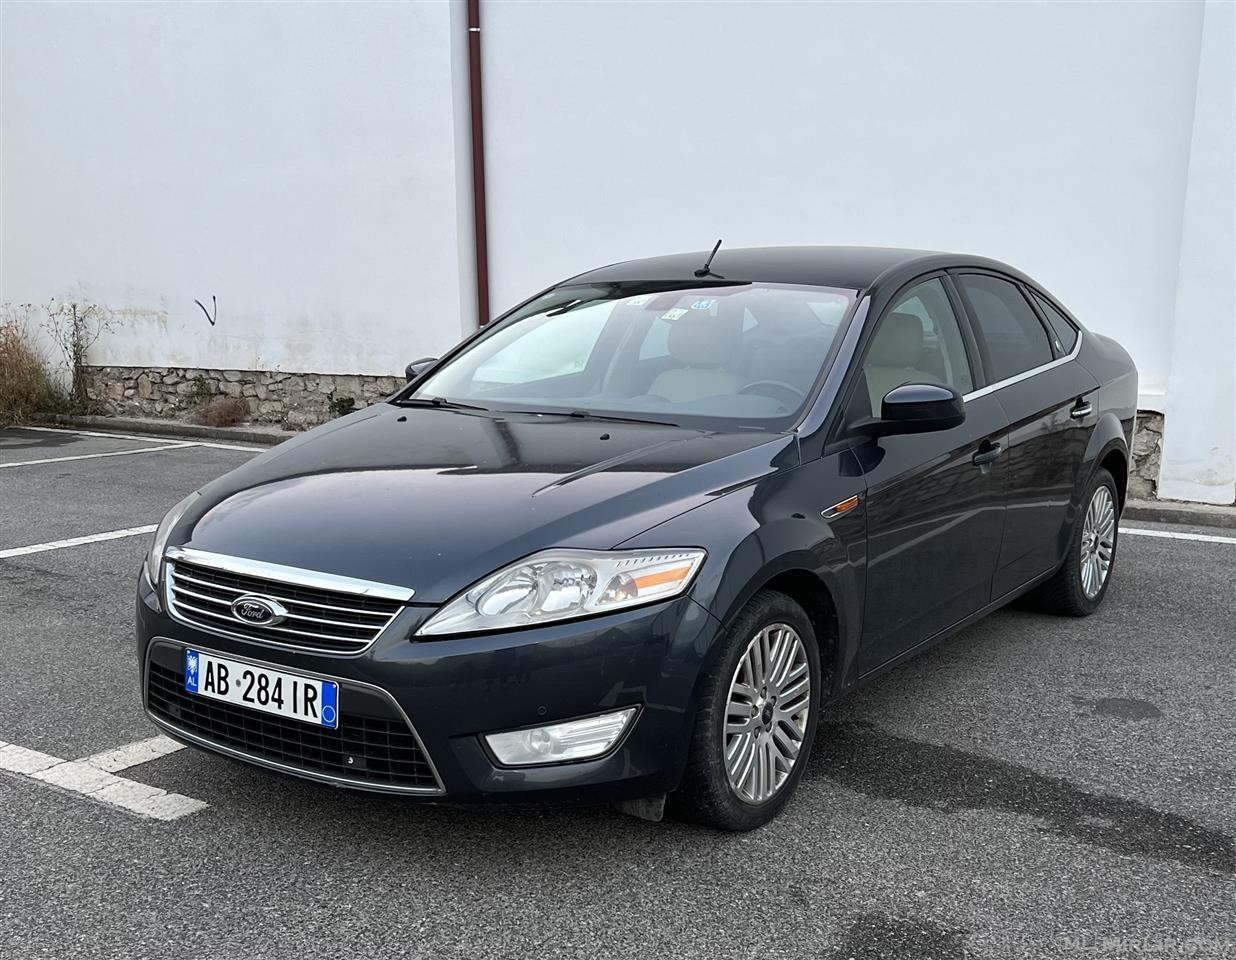 Ford Mondeo 2.0 automatic 